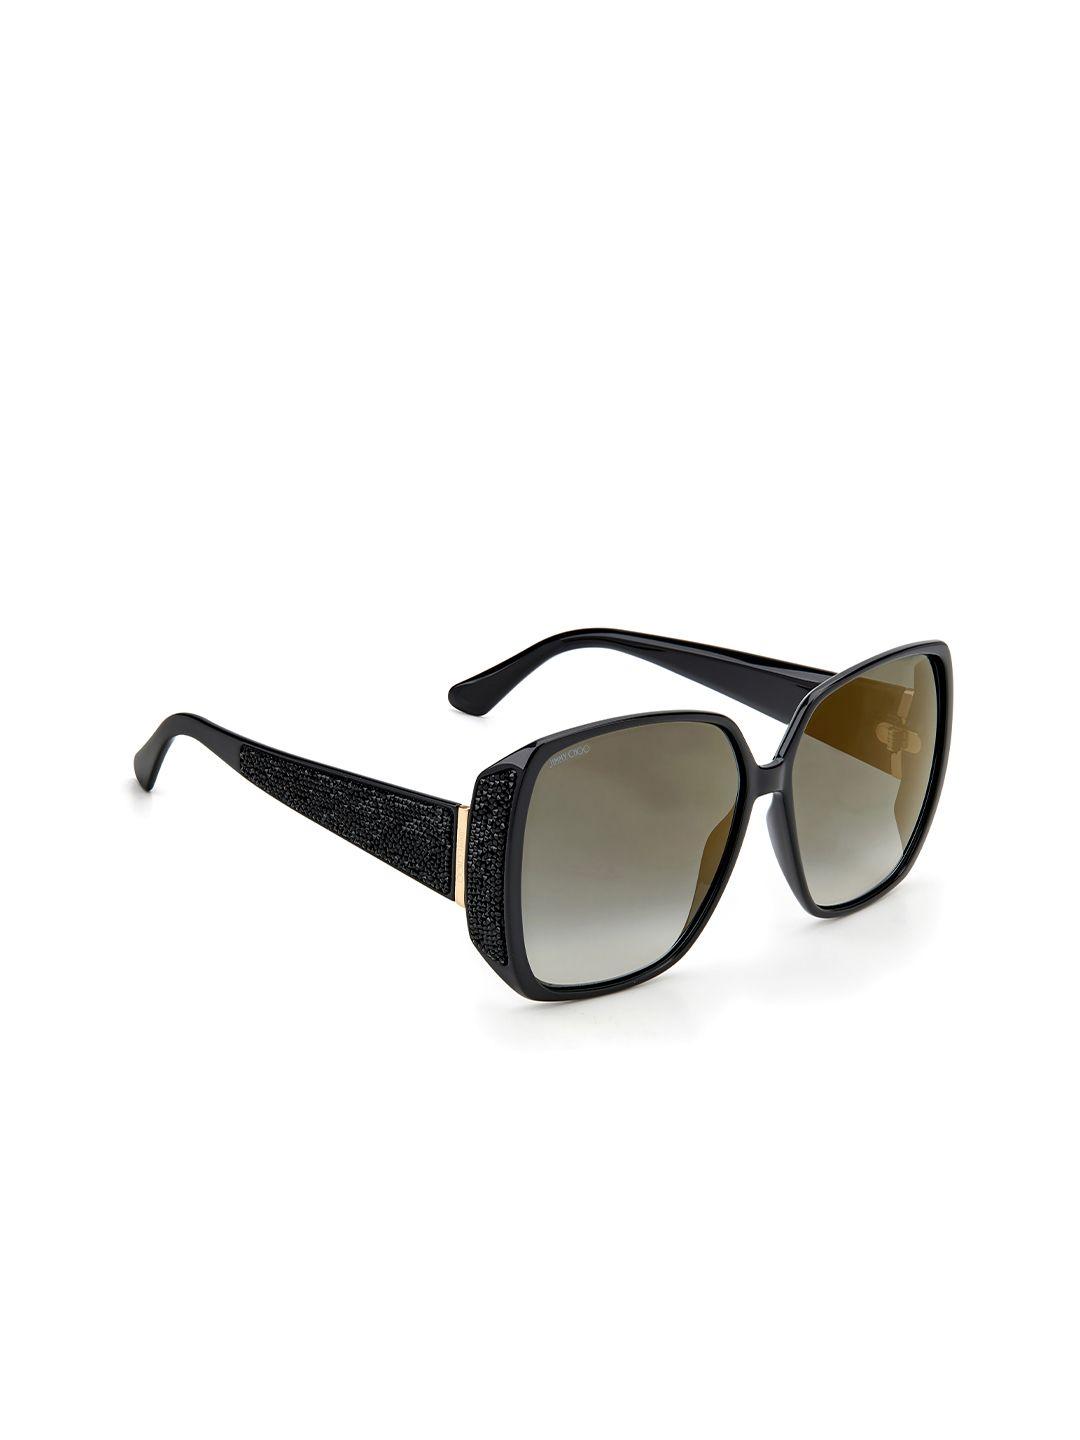 jimmy choo women square sunglasses with uv protected lens